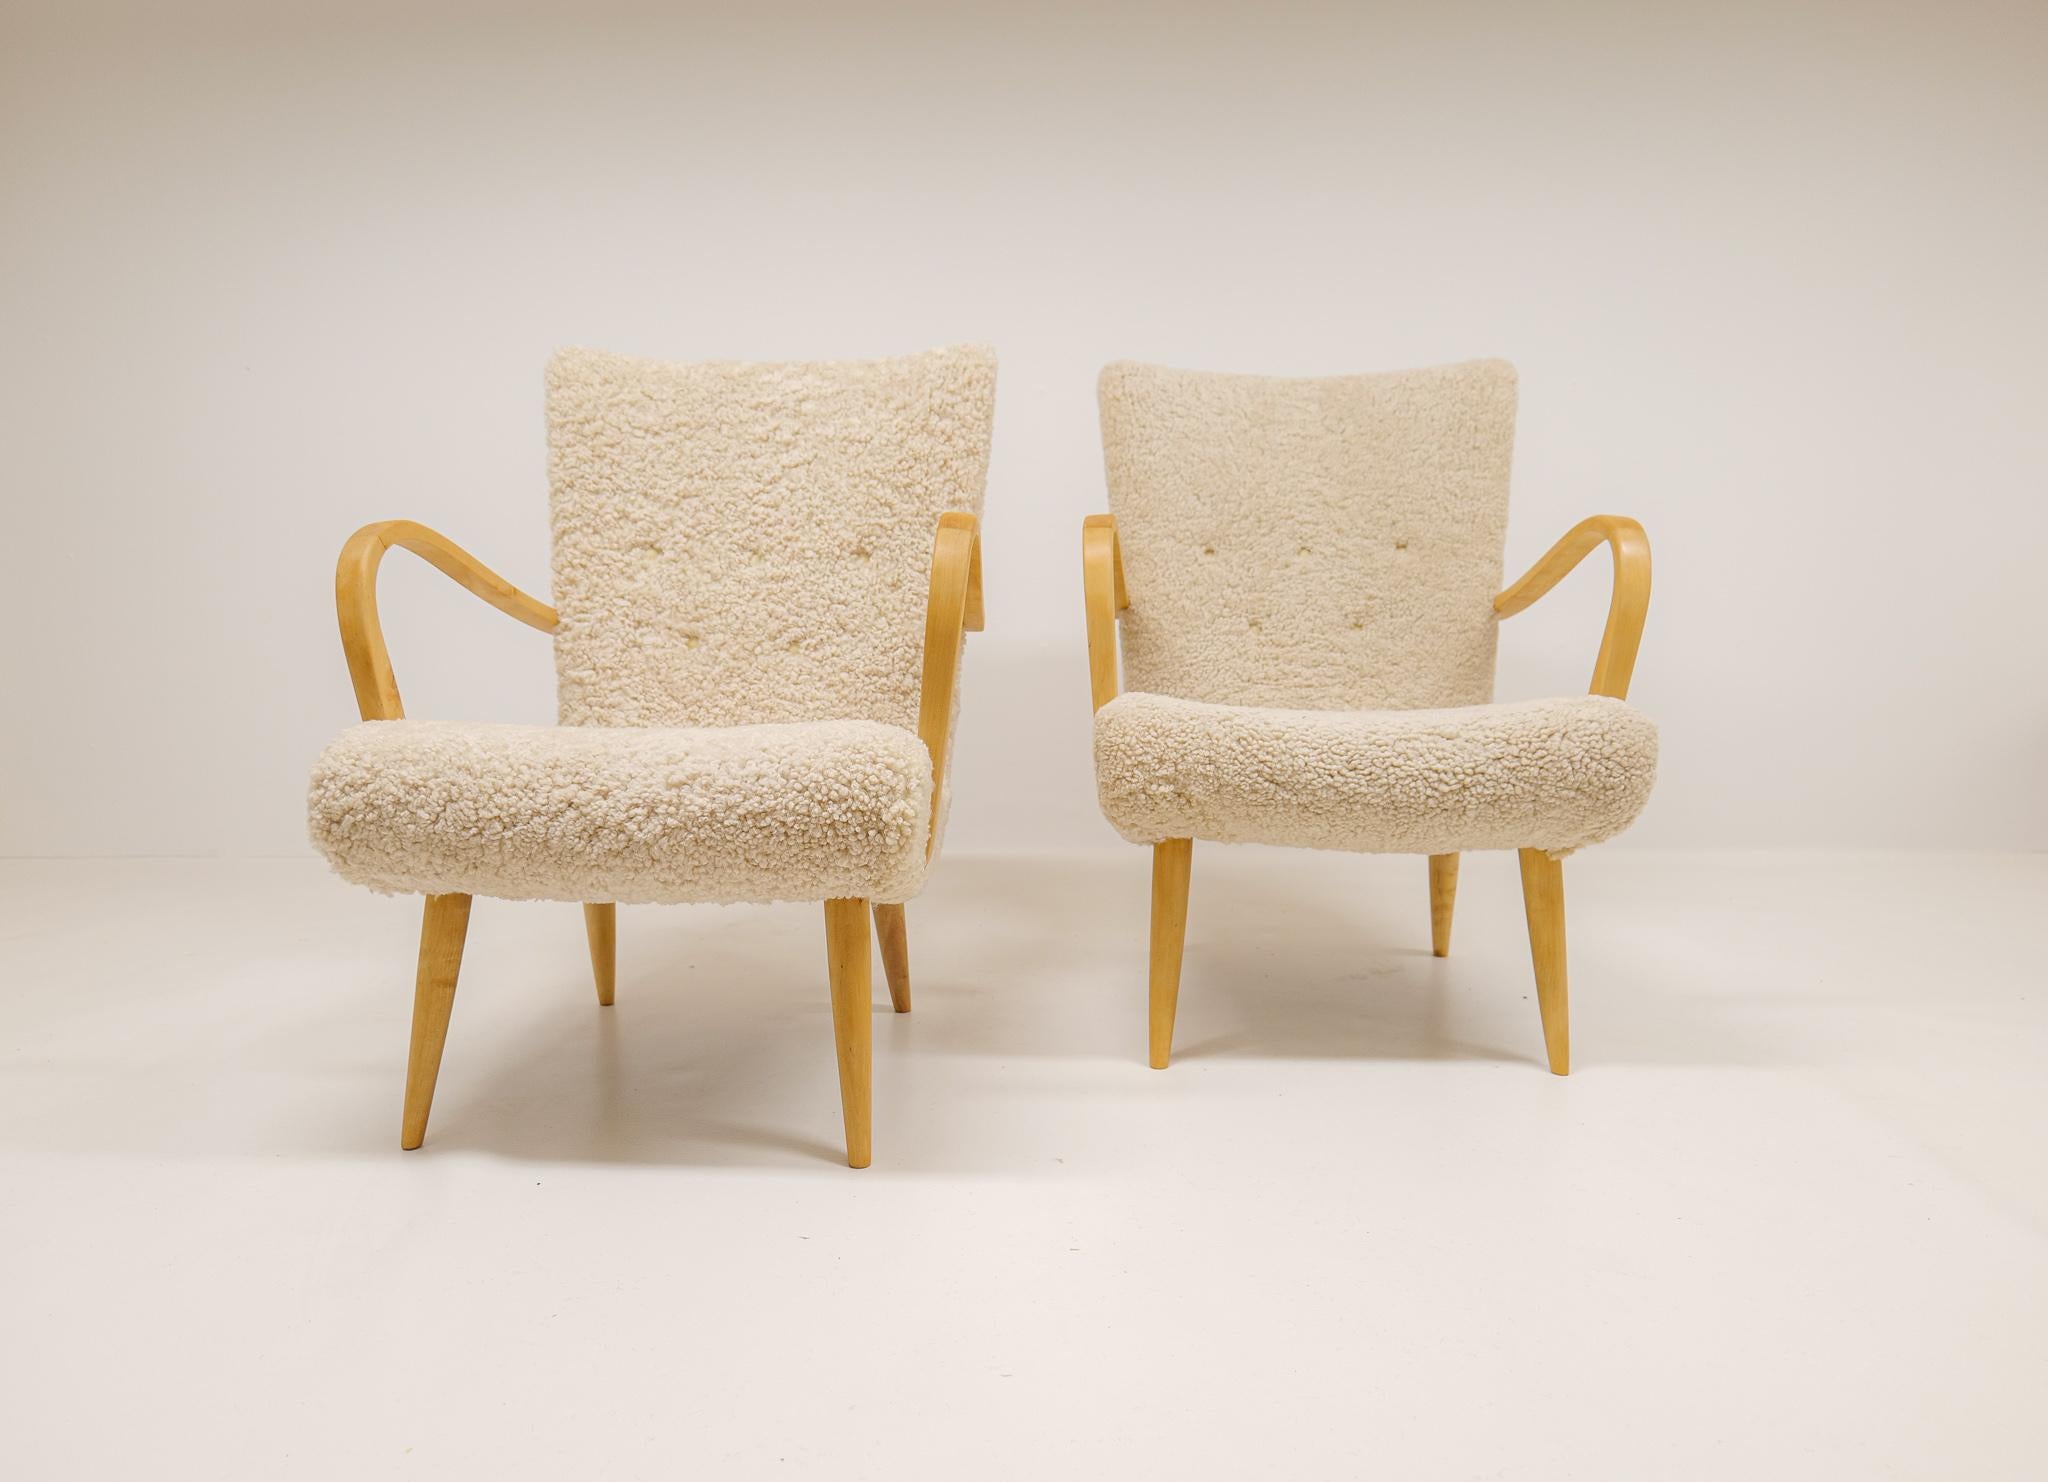 Mid-20th Century Midcentury Sculptural Lounge Chairs in Sheepskin Shearling Sweden 1950s